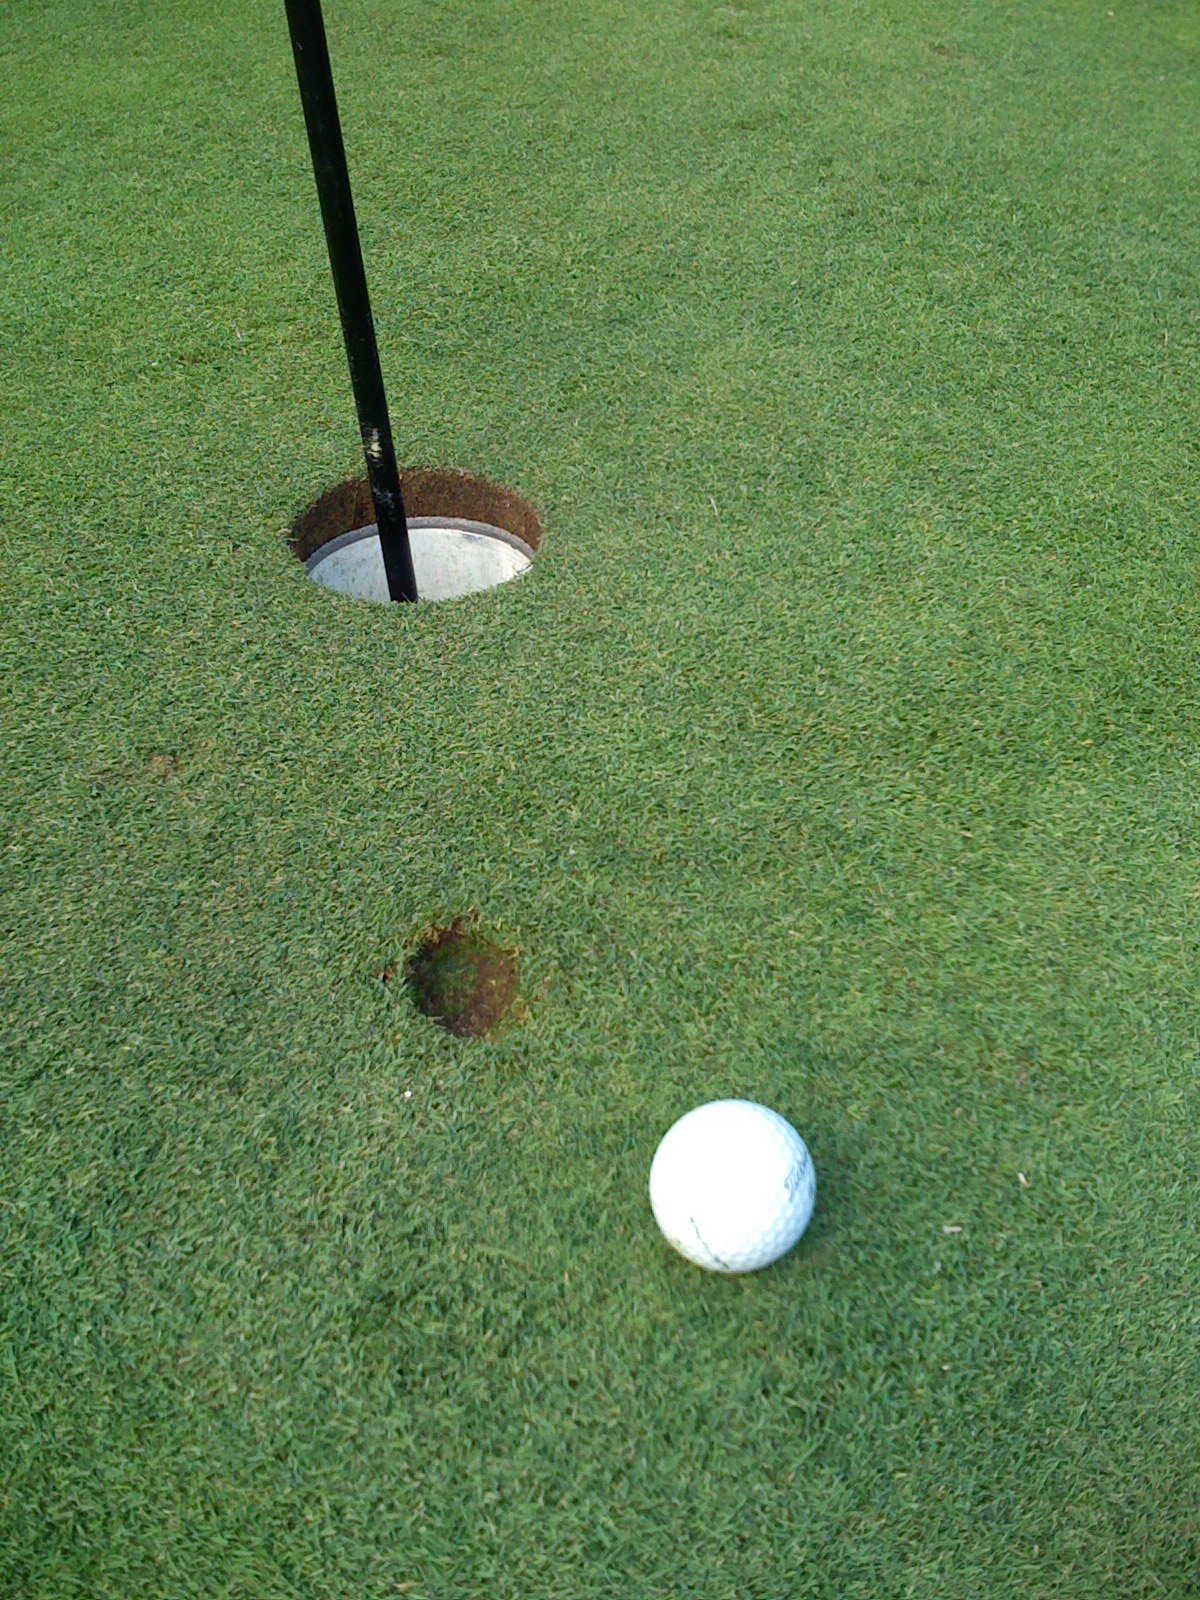 a ball is sitting next to a hole in the green grass